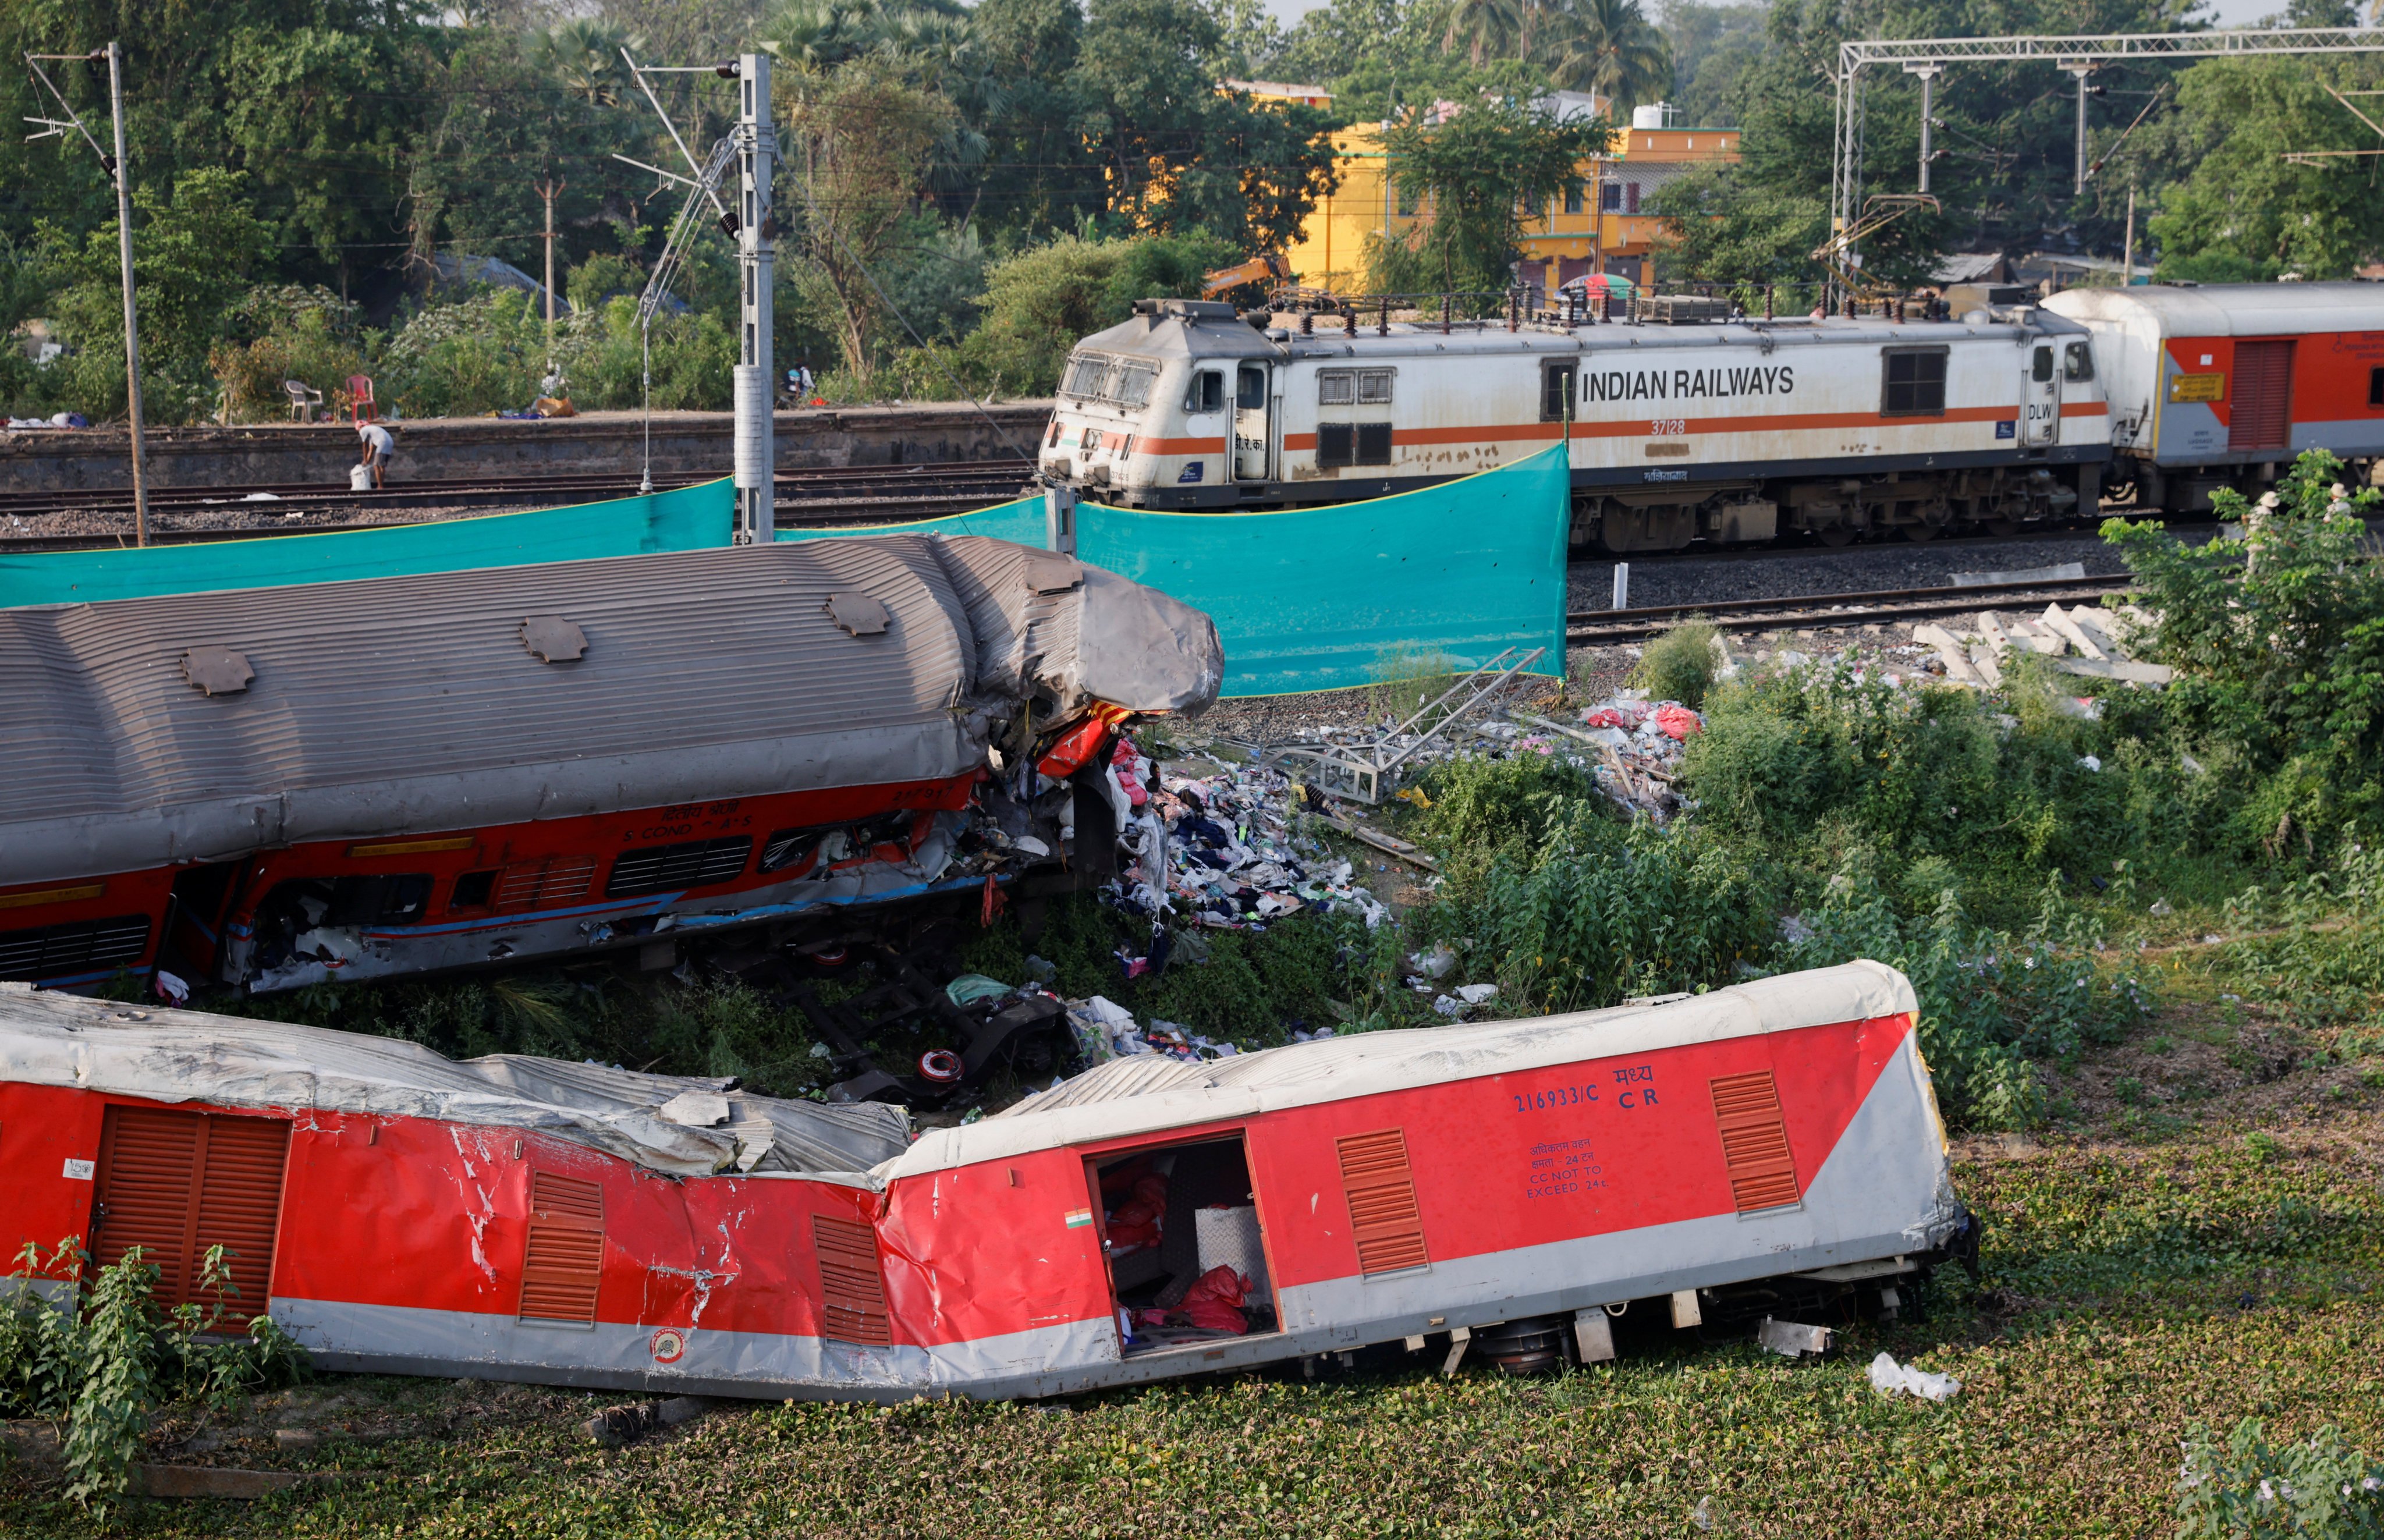 The site of the train collision in Odisha, India. Photo: Reuters